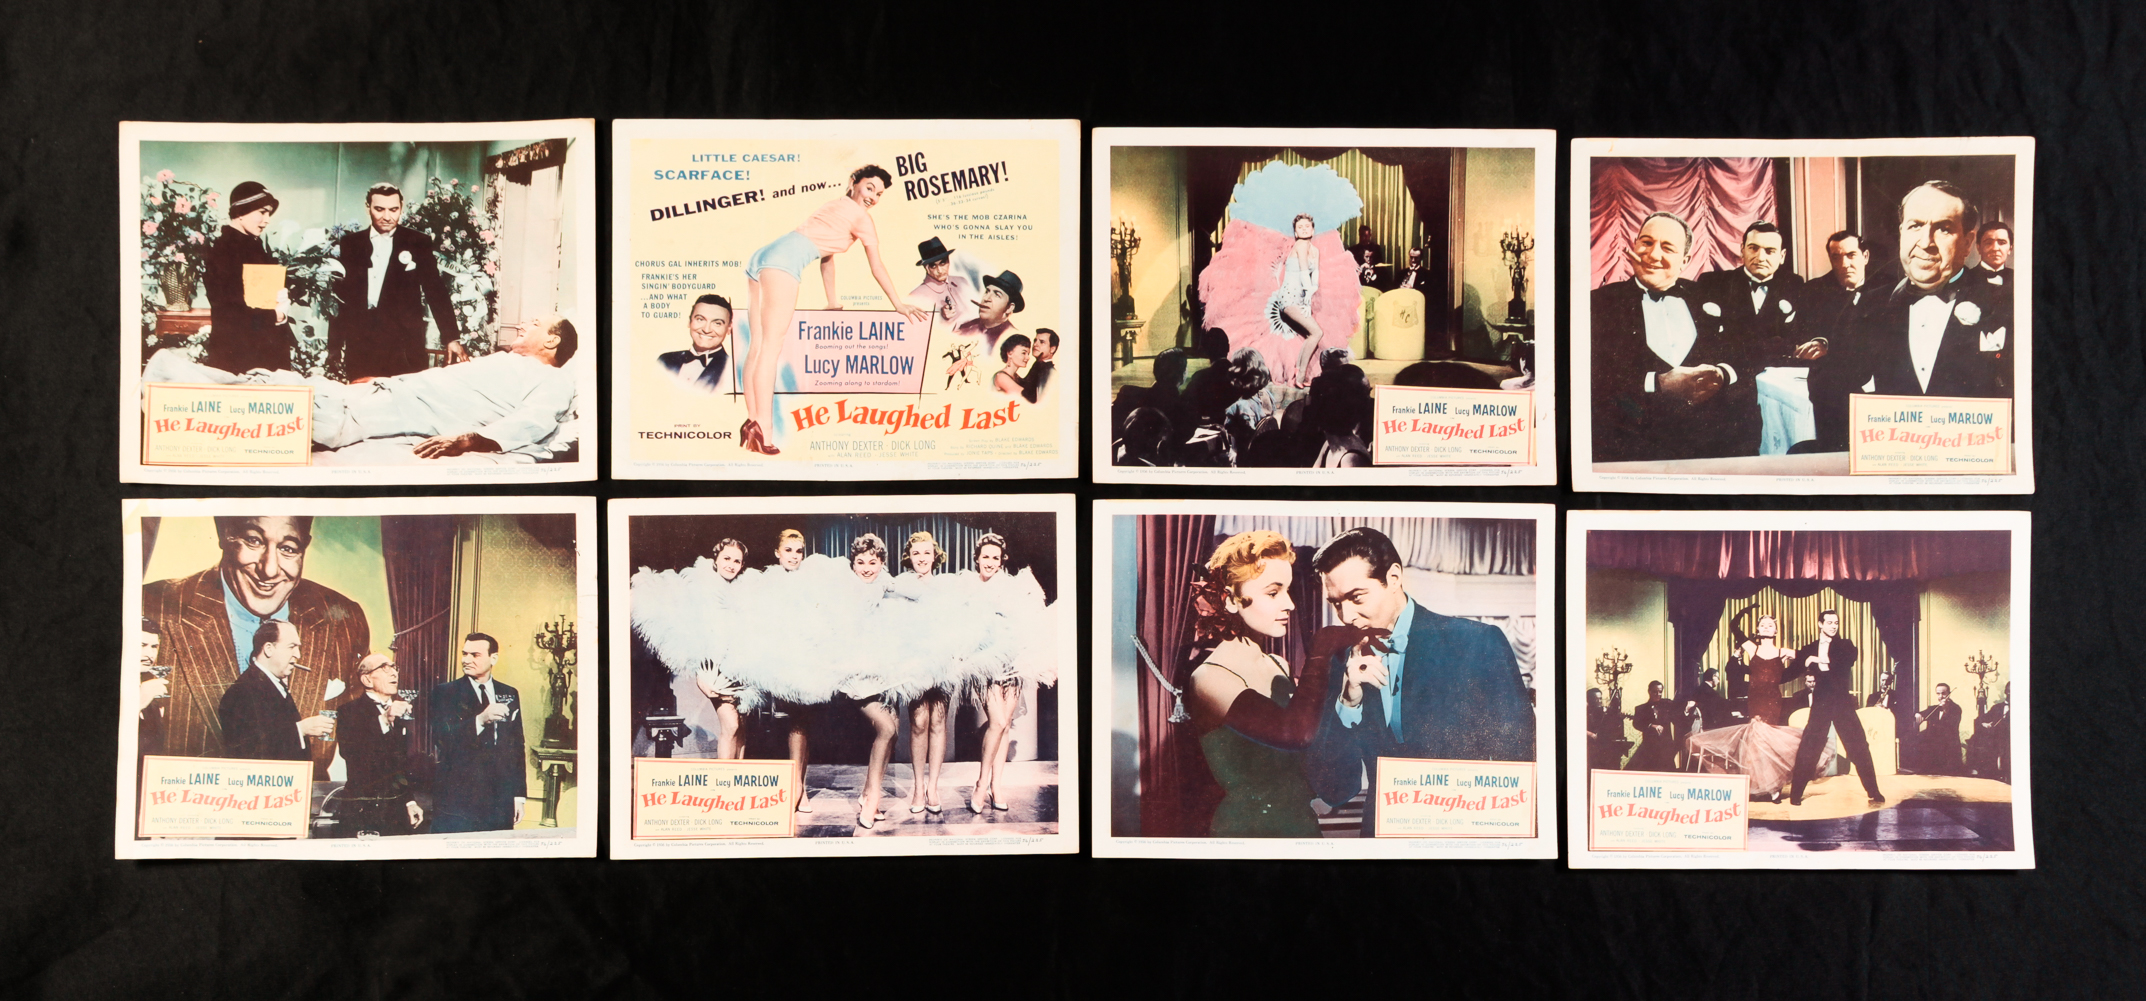 SET OF EIGHT HE LAUGHED LAST LOBBY CARDS.